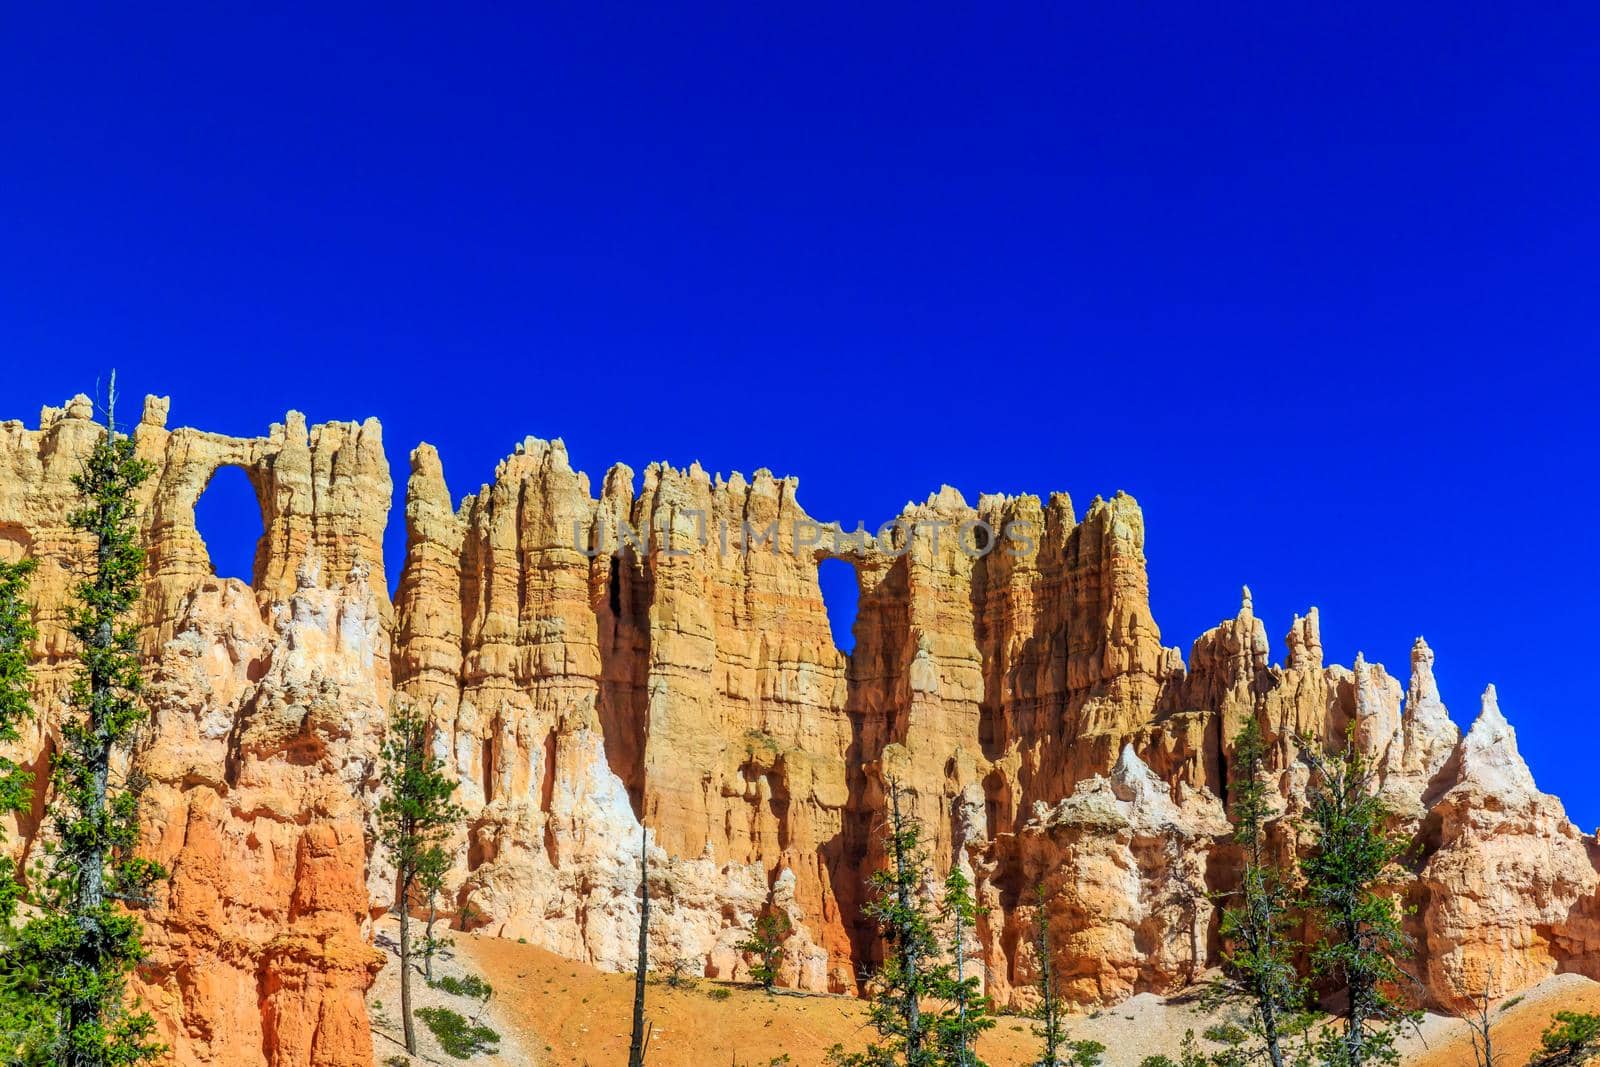 Windows in a cliffwall of hoodoos at the 'Wall of Windows' in Bryce Canyon National Park, Utah.